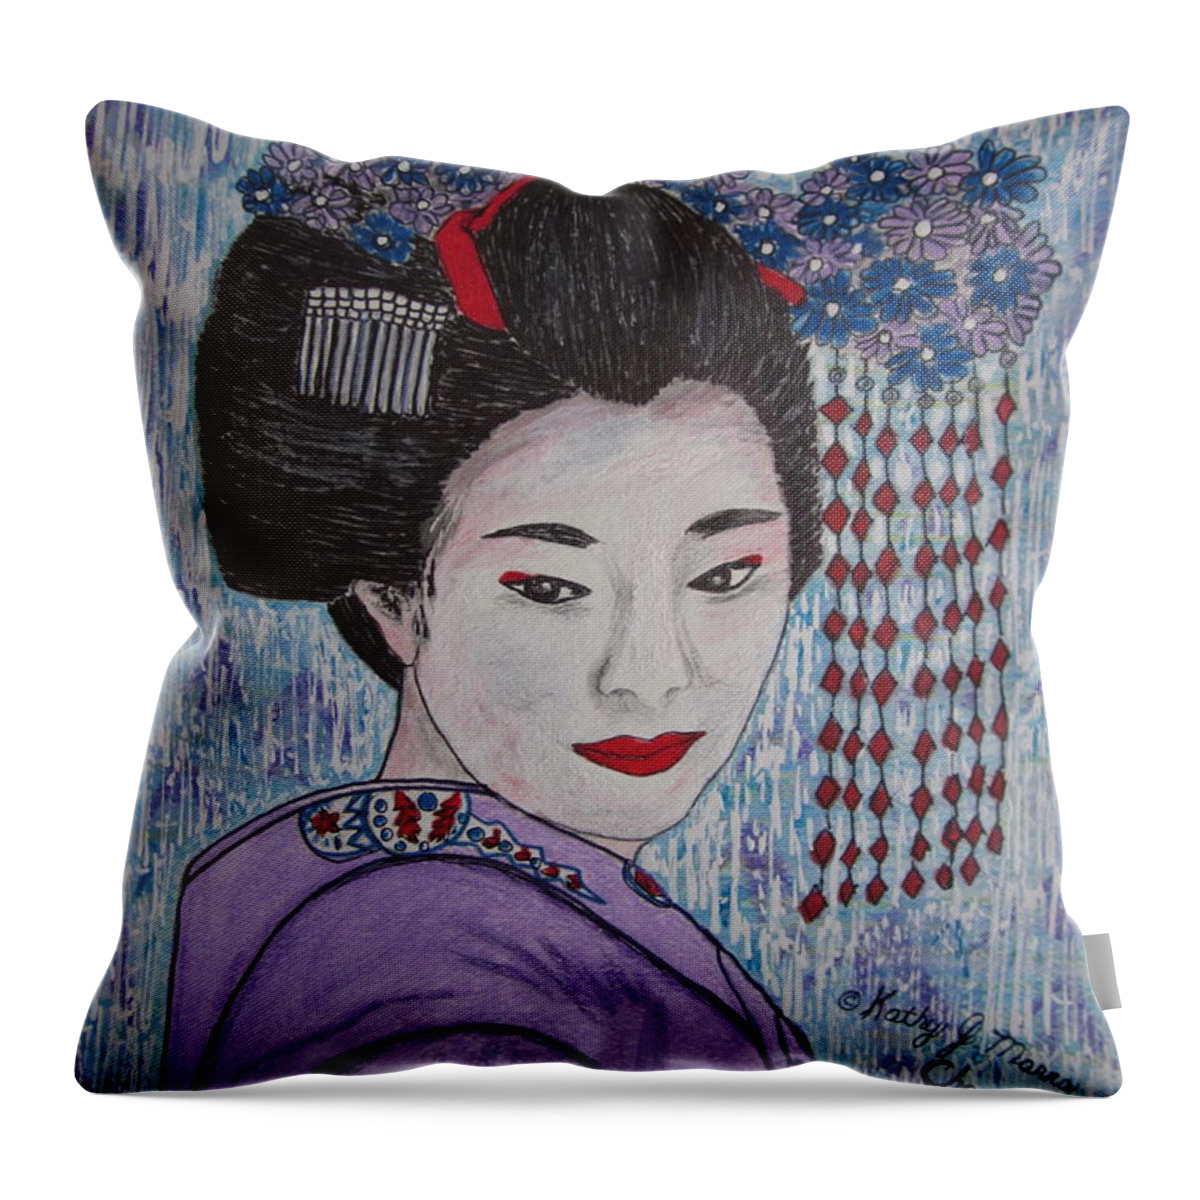 Oriental Throw Pillow featuring the painting Geisha Girl by Kathy Marrs Chandler